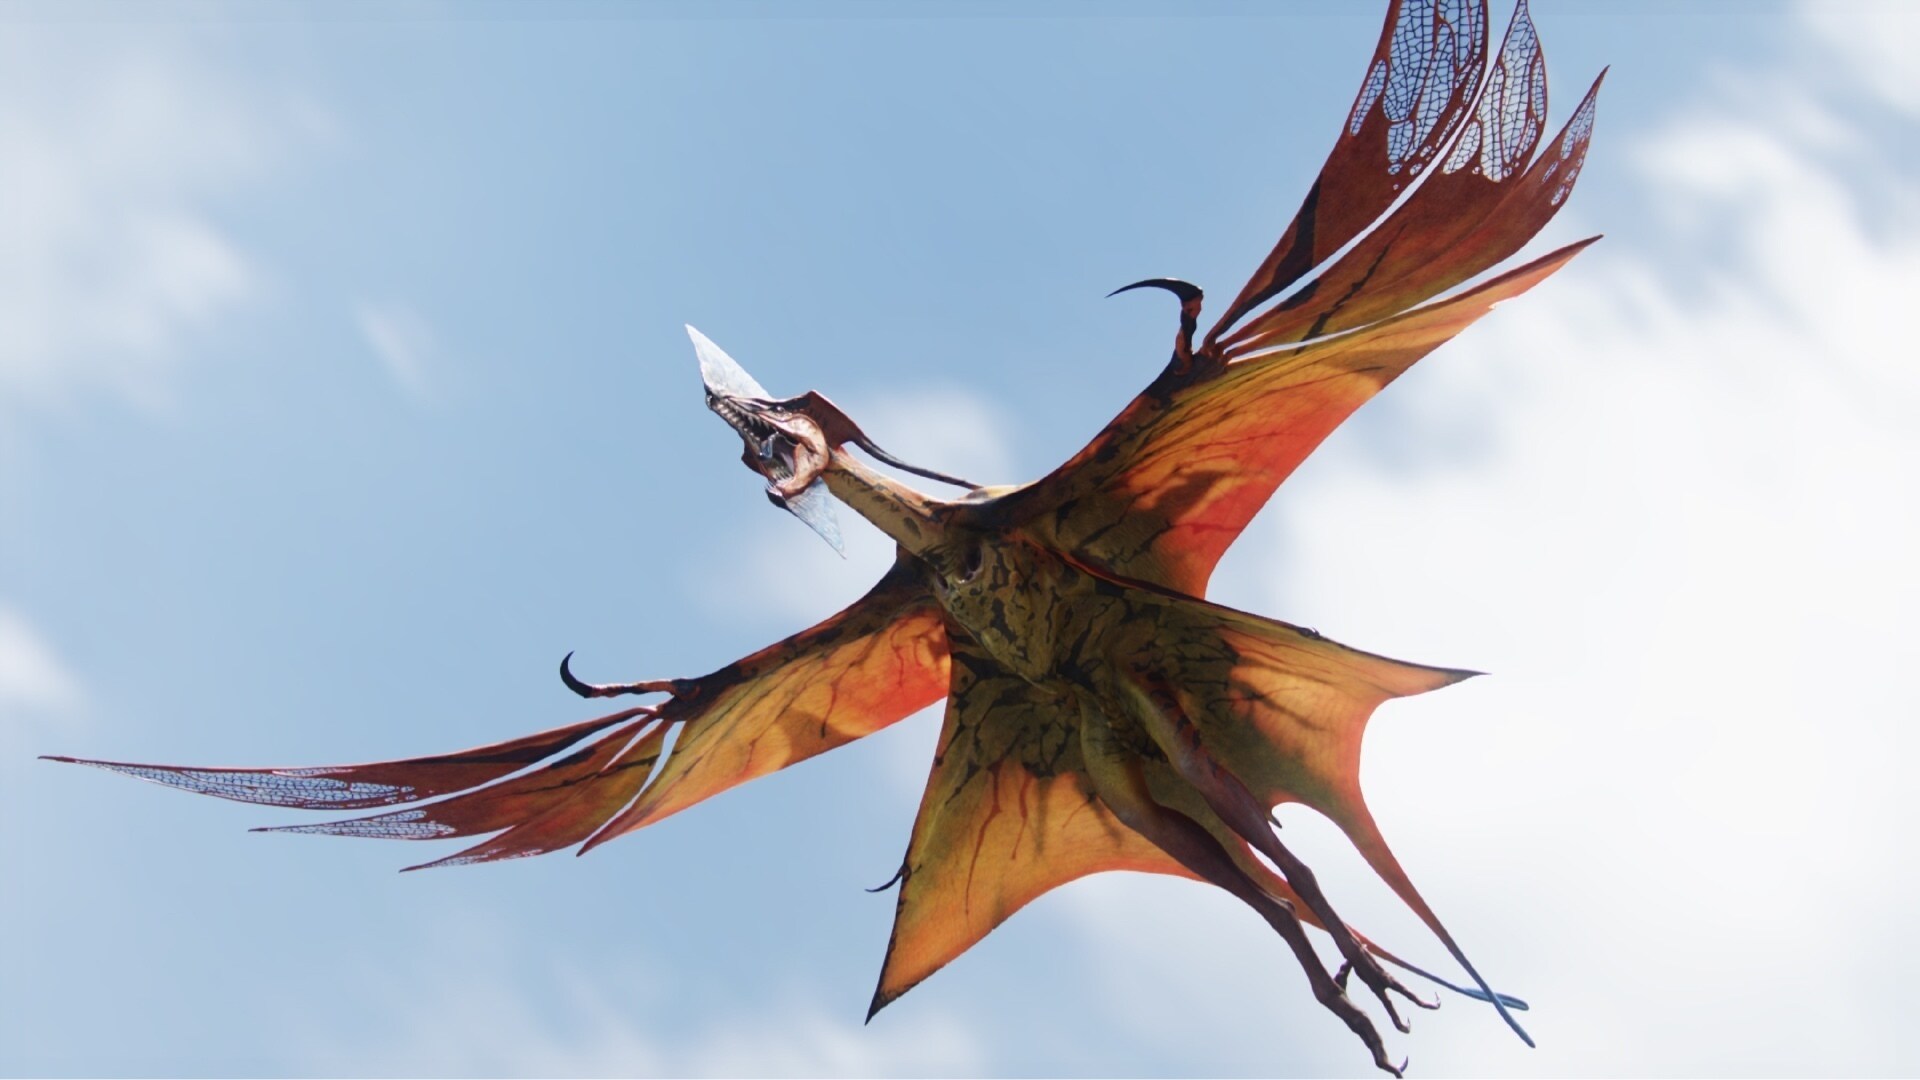 The Great Leonopteryx soaring above.